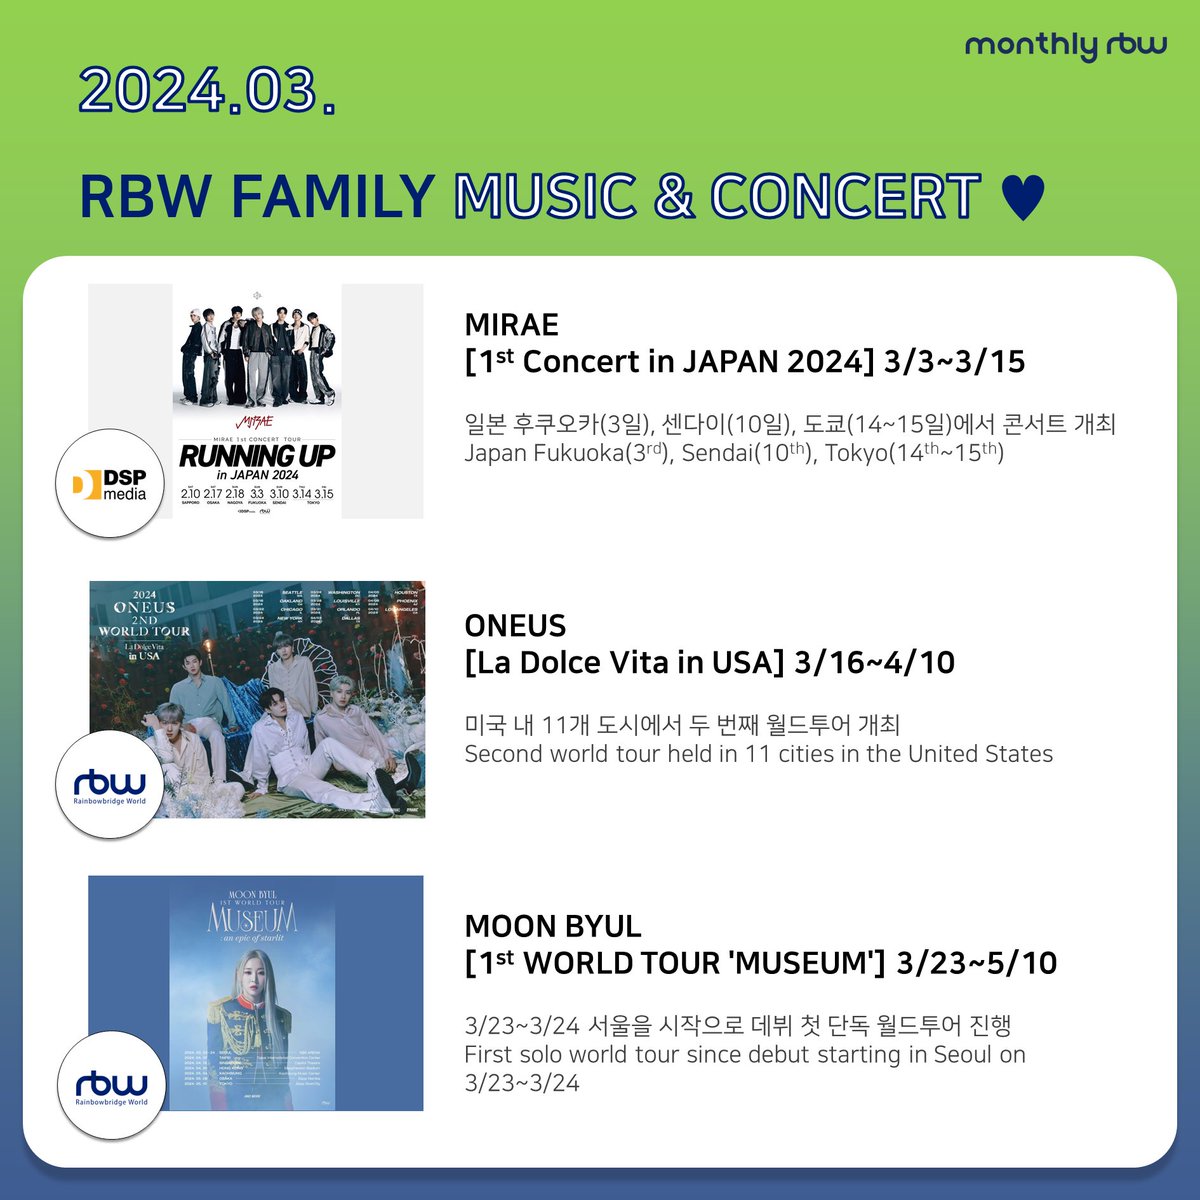 🌈 [MONTHLY RBW] 2024.03. RBW FAMILY MUSIC & CONCERT 💙 #RBW #알비더블유 #DSP #WM #MIRAE #KARD #ONF #MOONBYUL #ONEUS #YOOA #PURPLEKISS